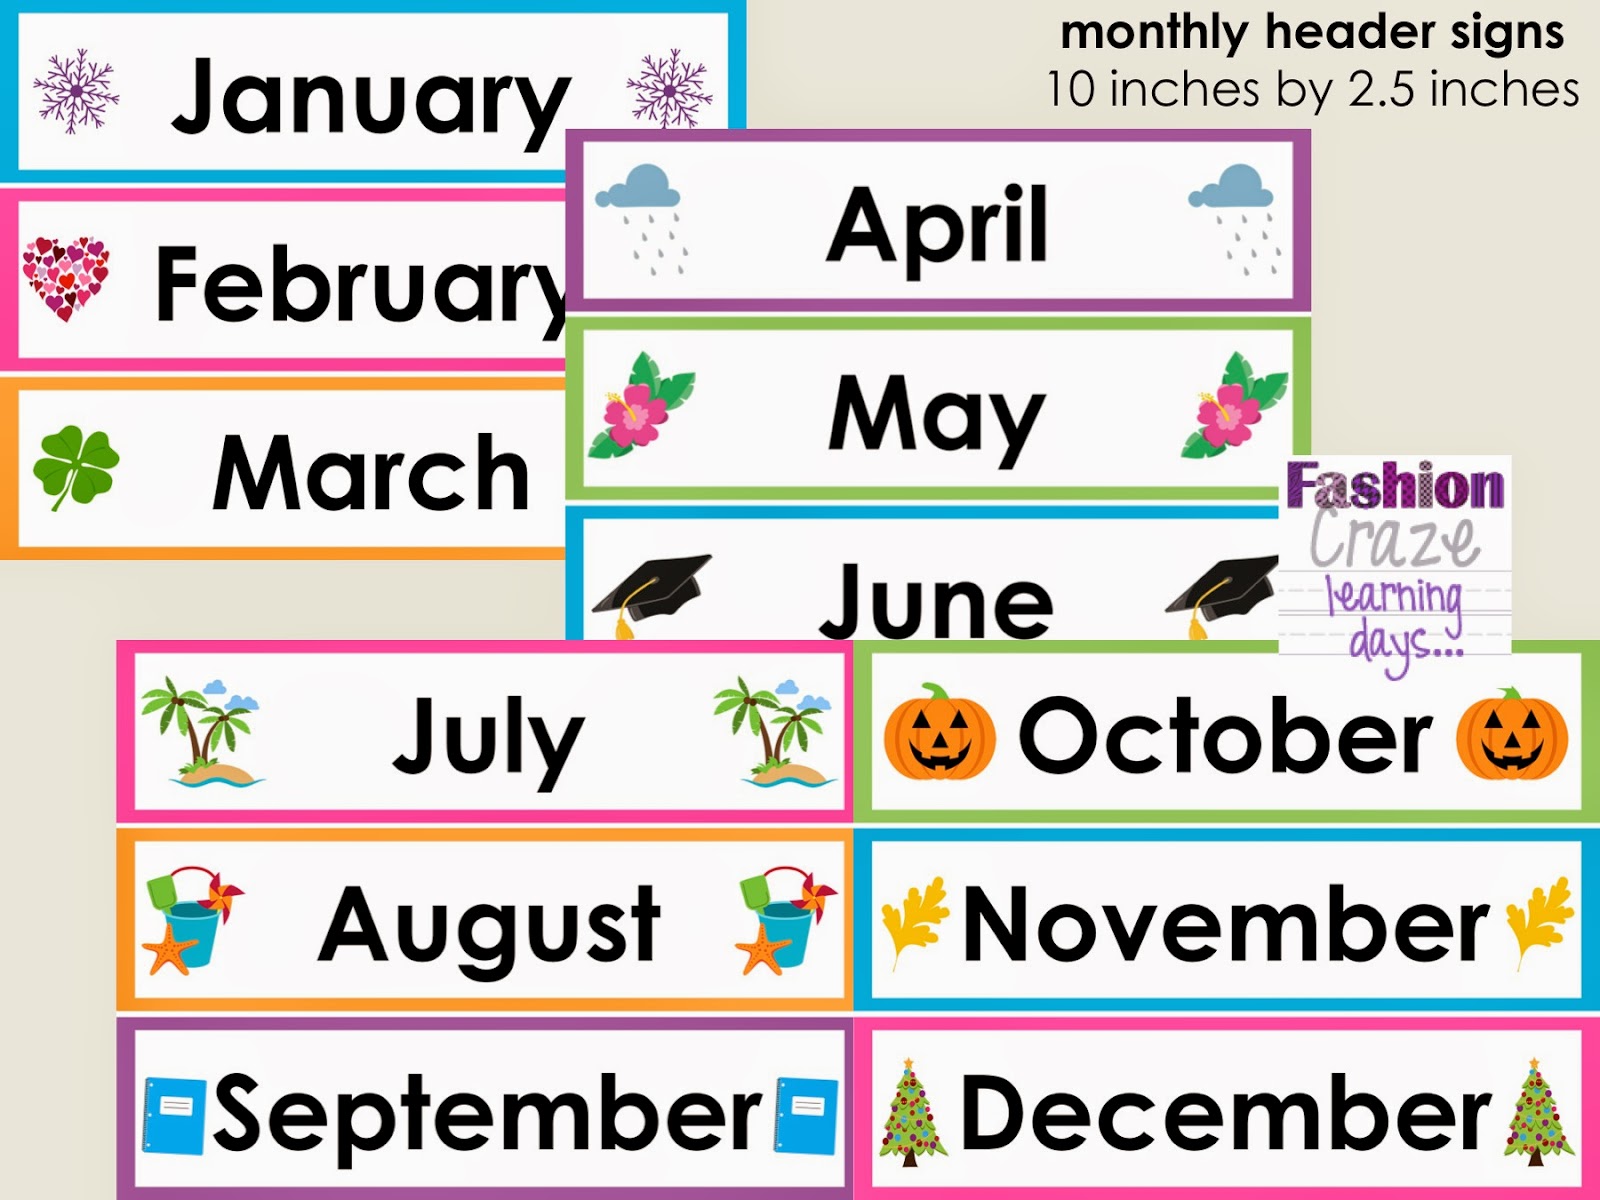 october clipart free month name